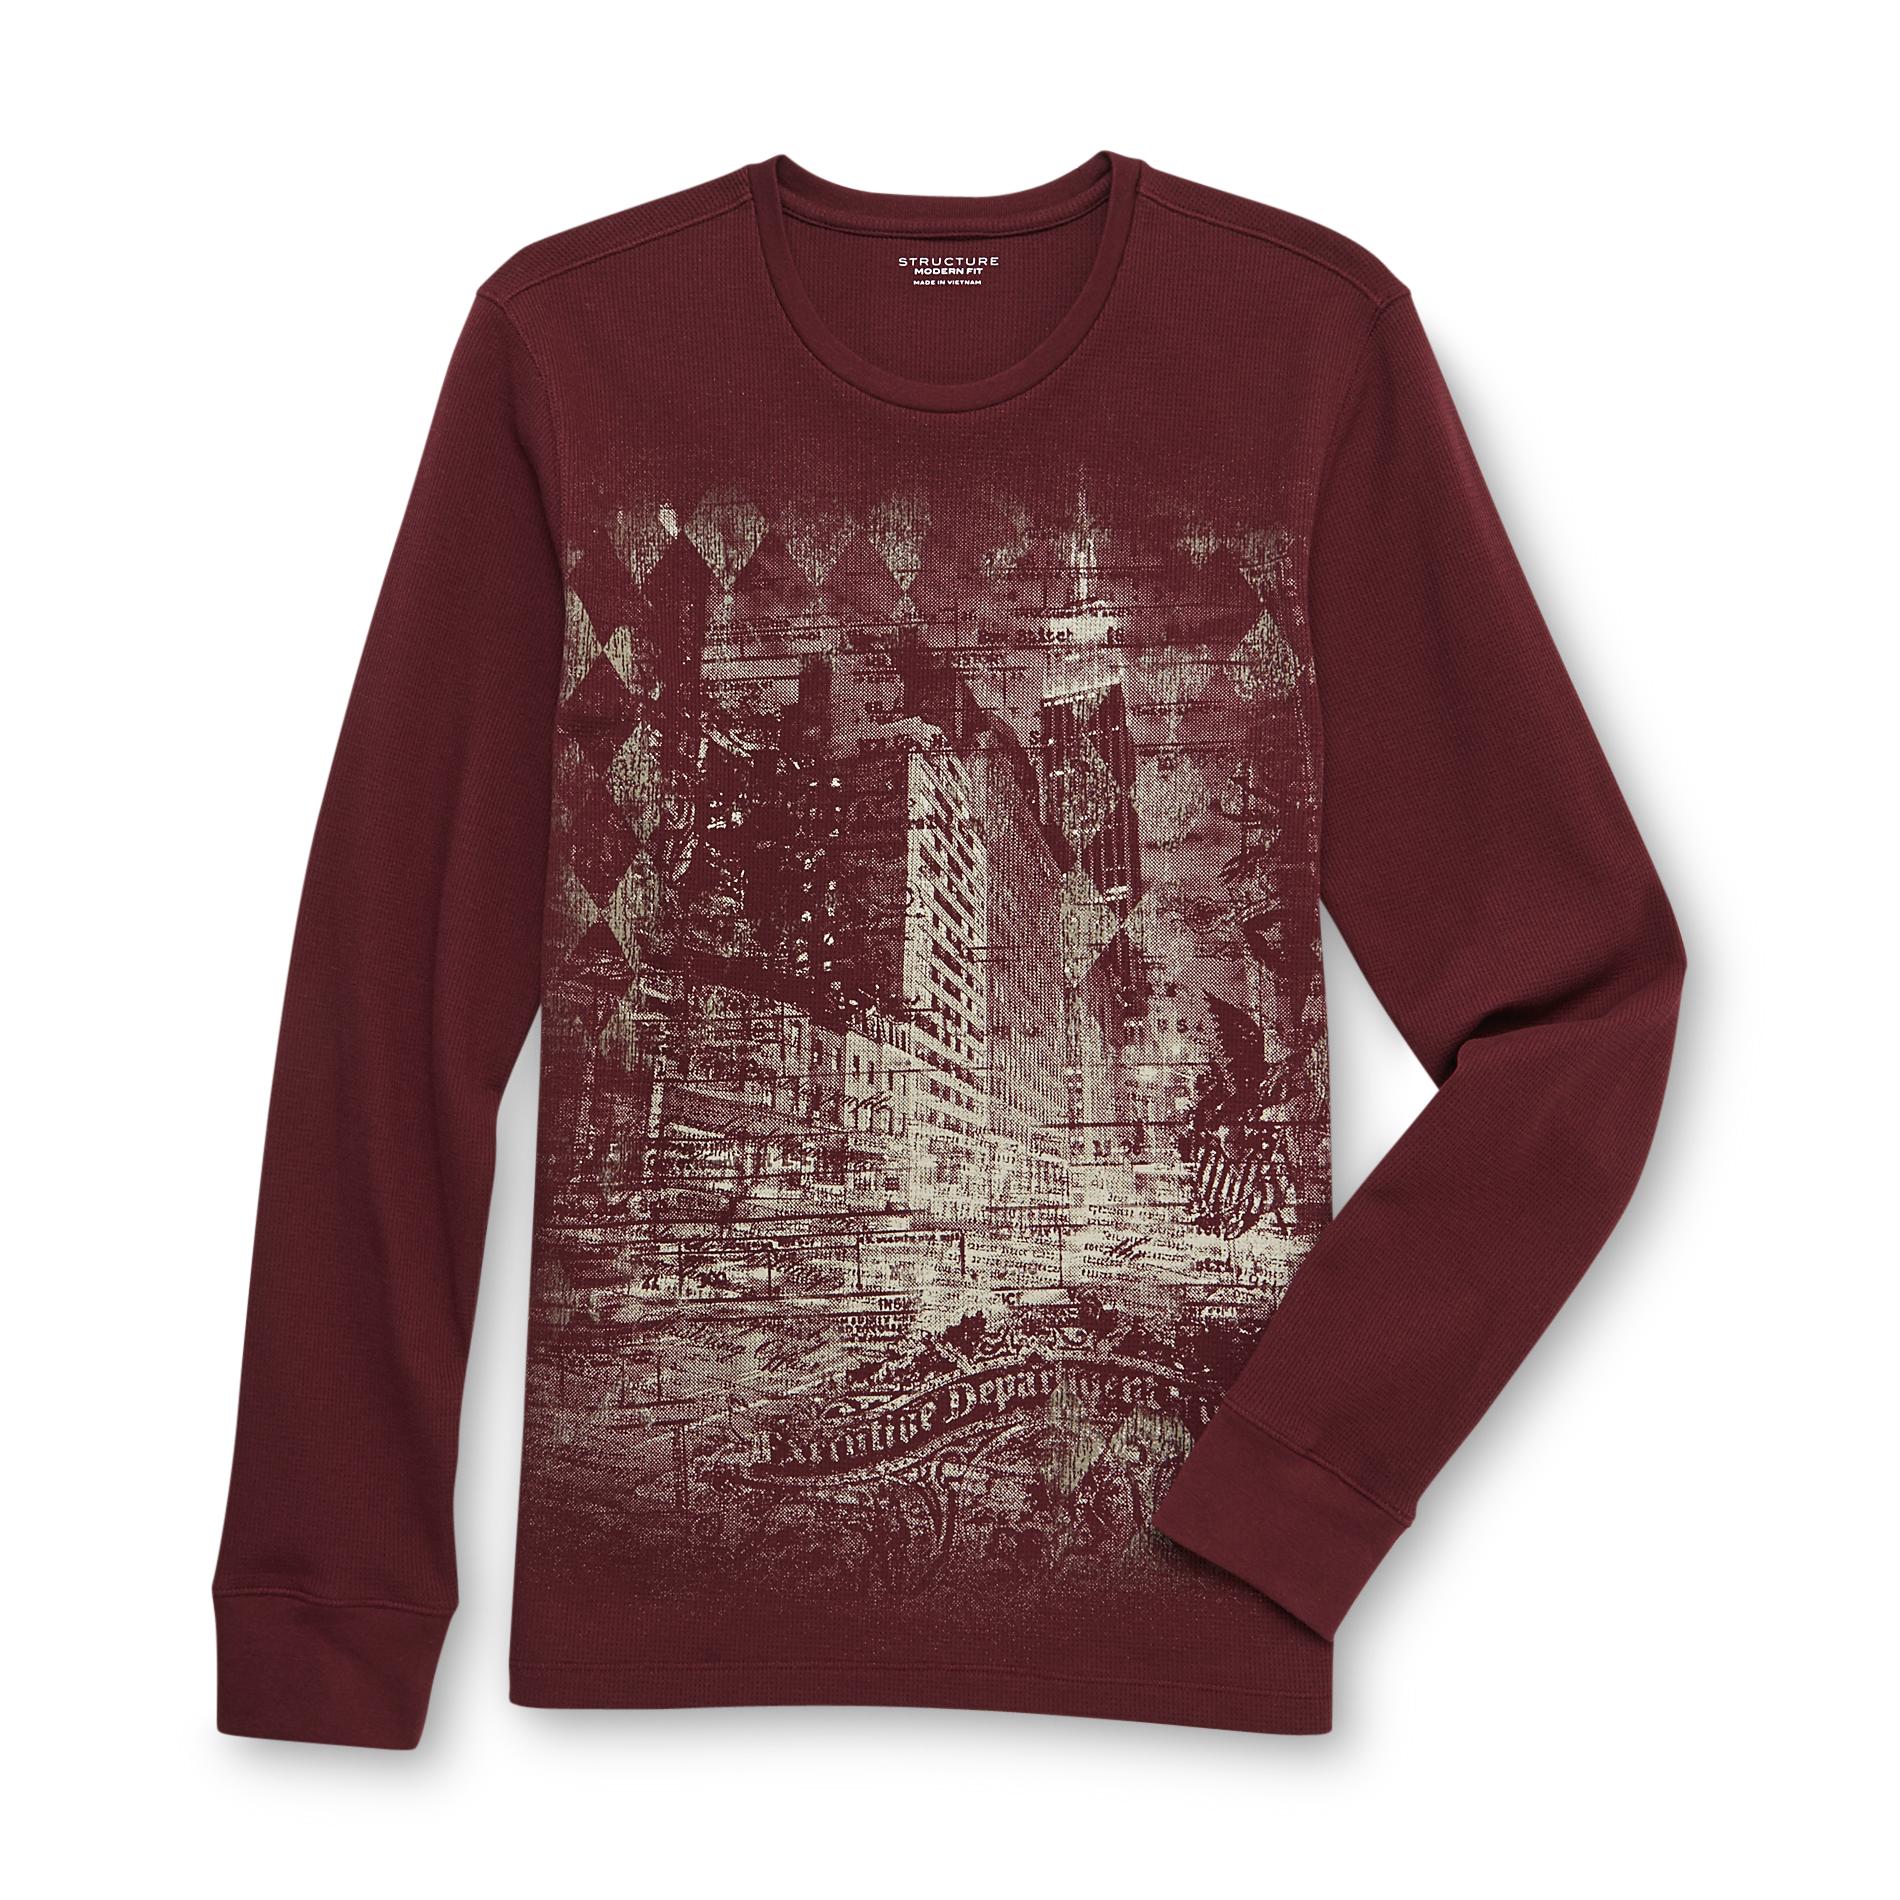 Structure Men's Thermal Graphic T-Shirt - Cityscape